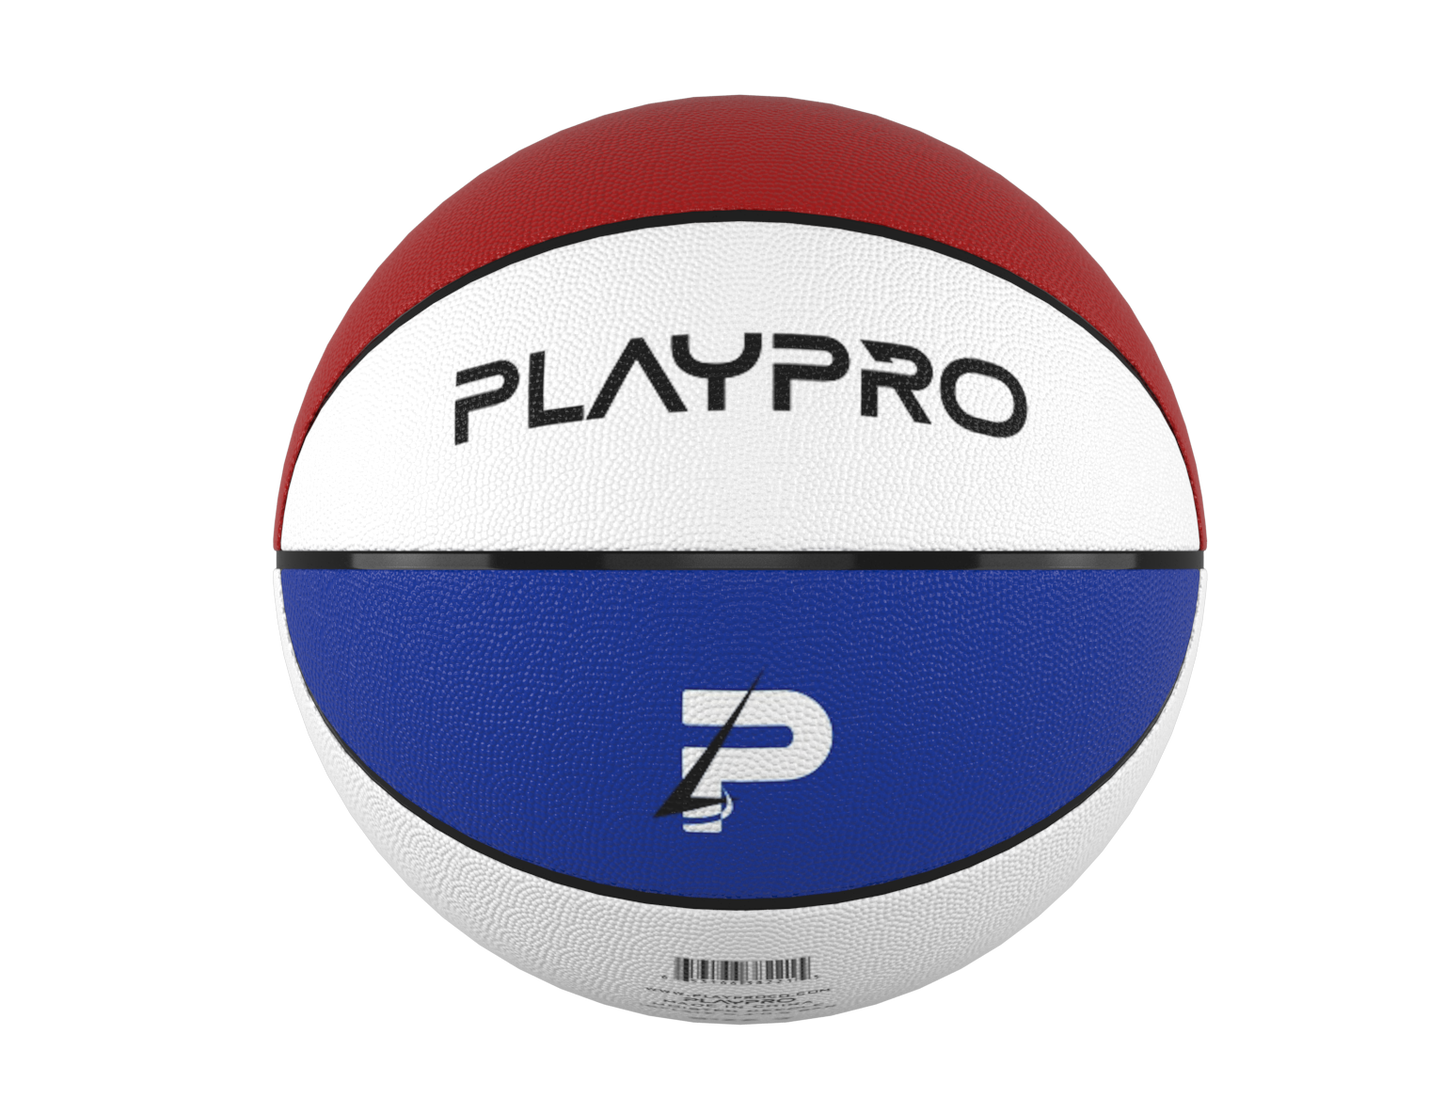 Premium Rubber Basketball for Kids and Adults – Max Grip, Perfect Bounce and Rebound with Extended Air Retention - Red, White and Blue